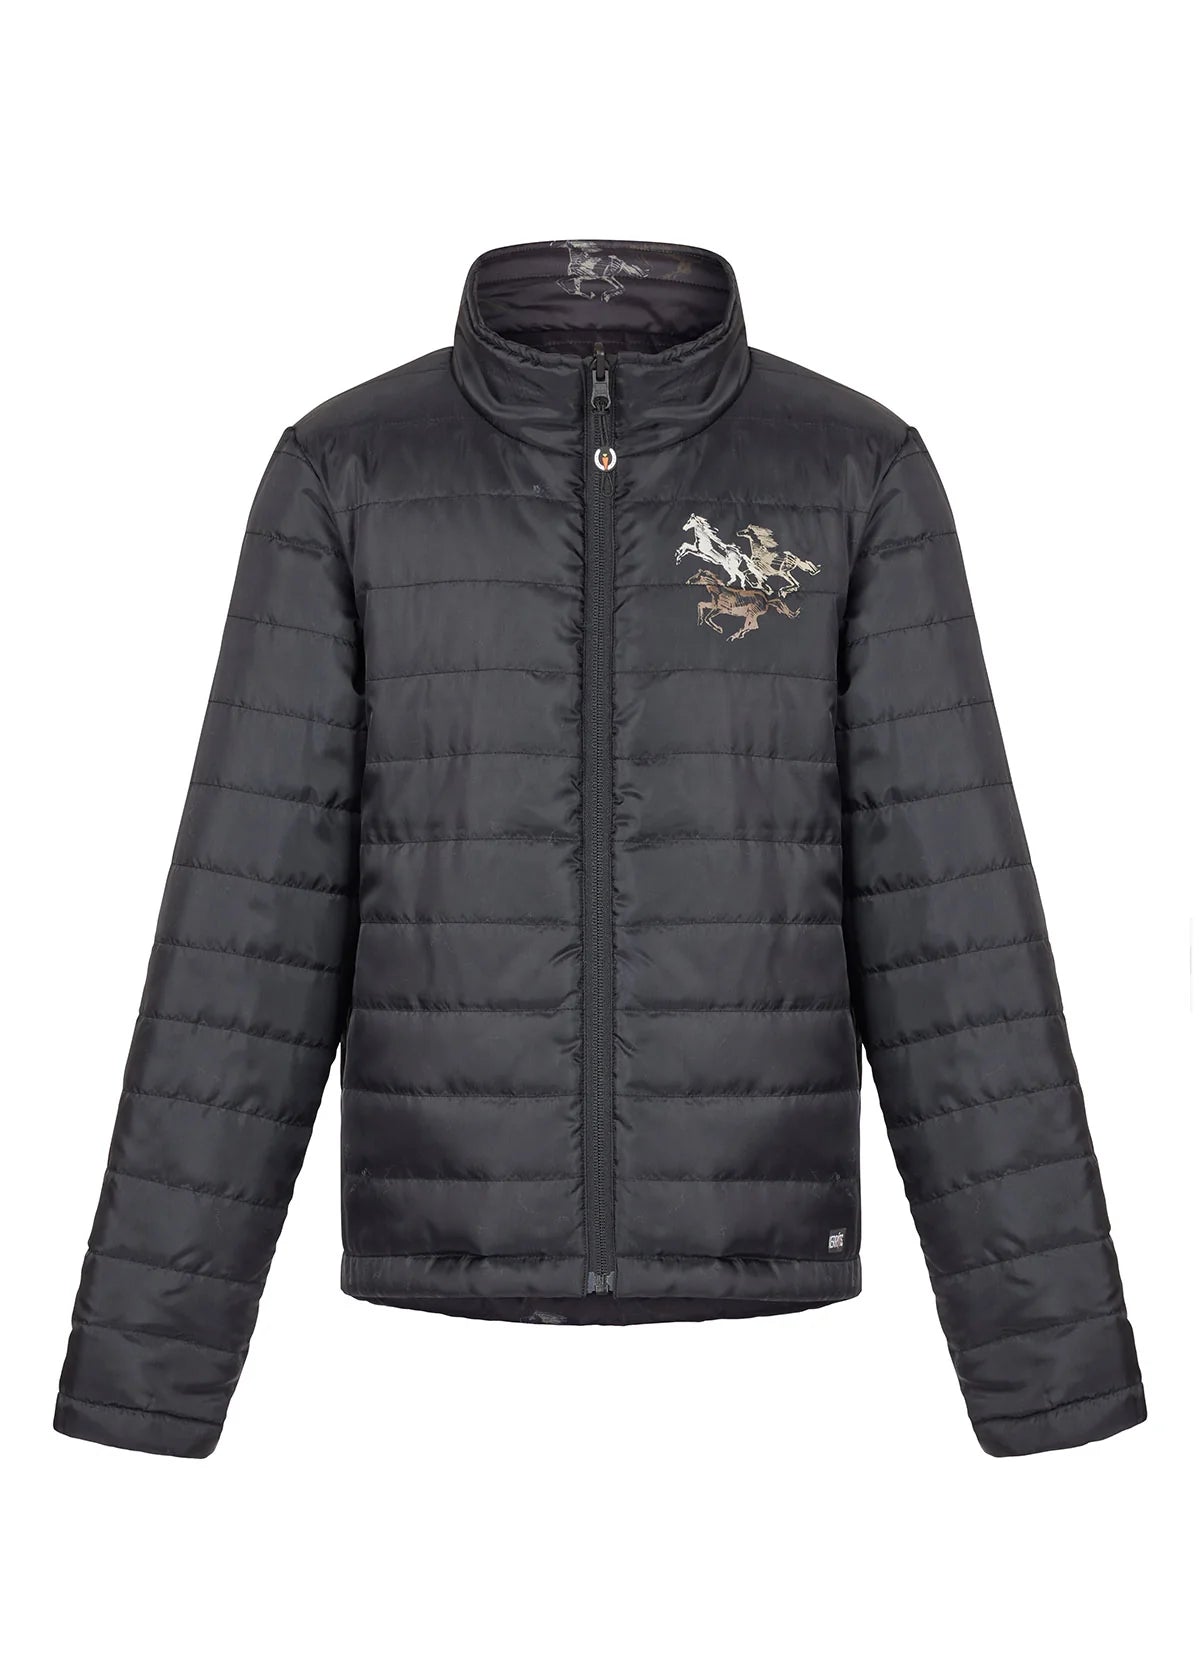 Kerrits Kids Pony Tracks Reversible Quilted Riding Jacket - CLEARANCE